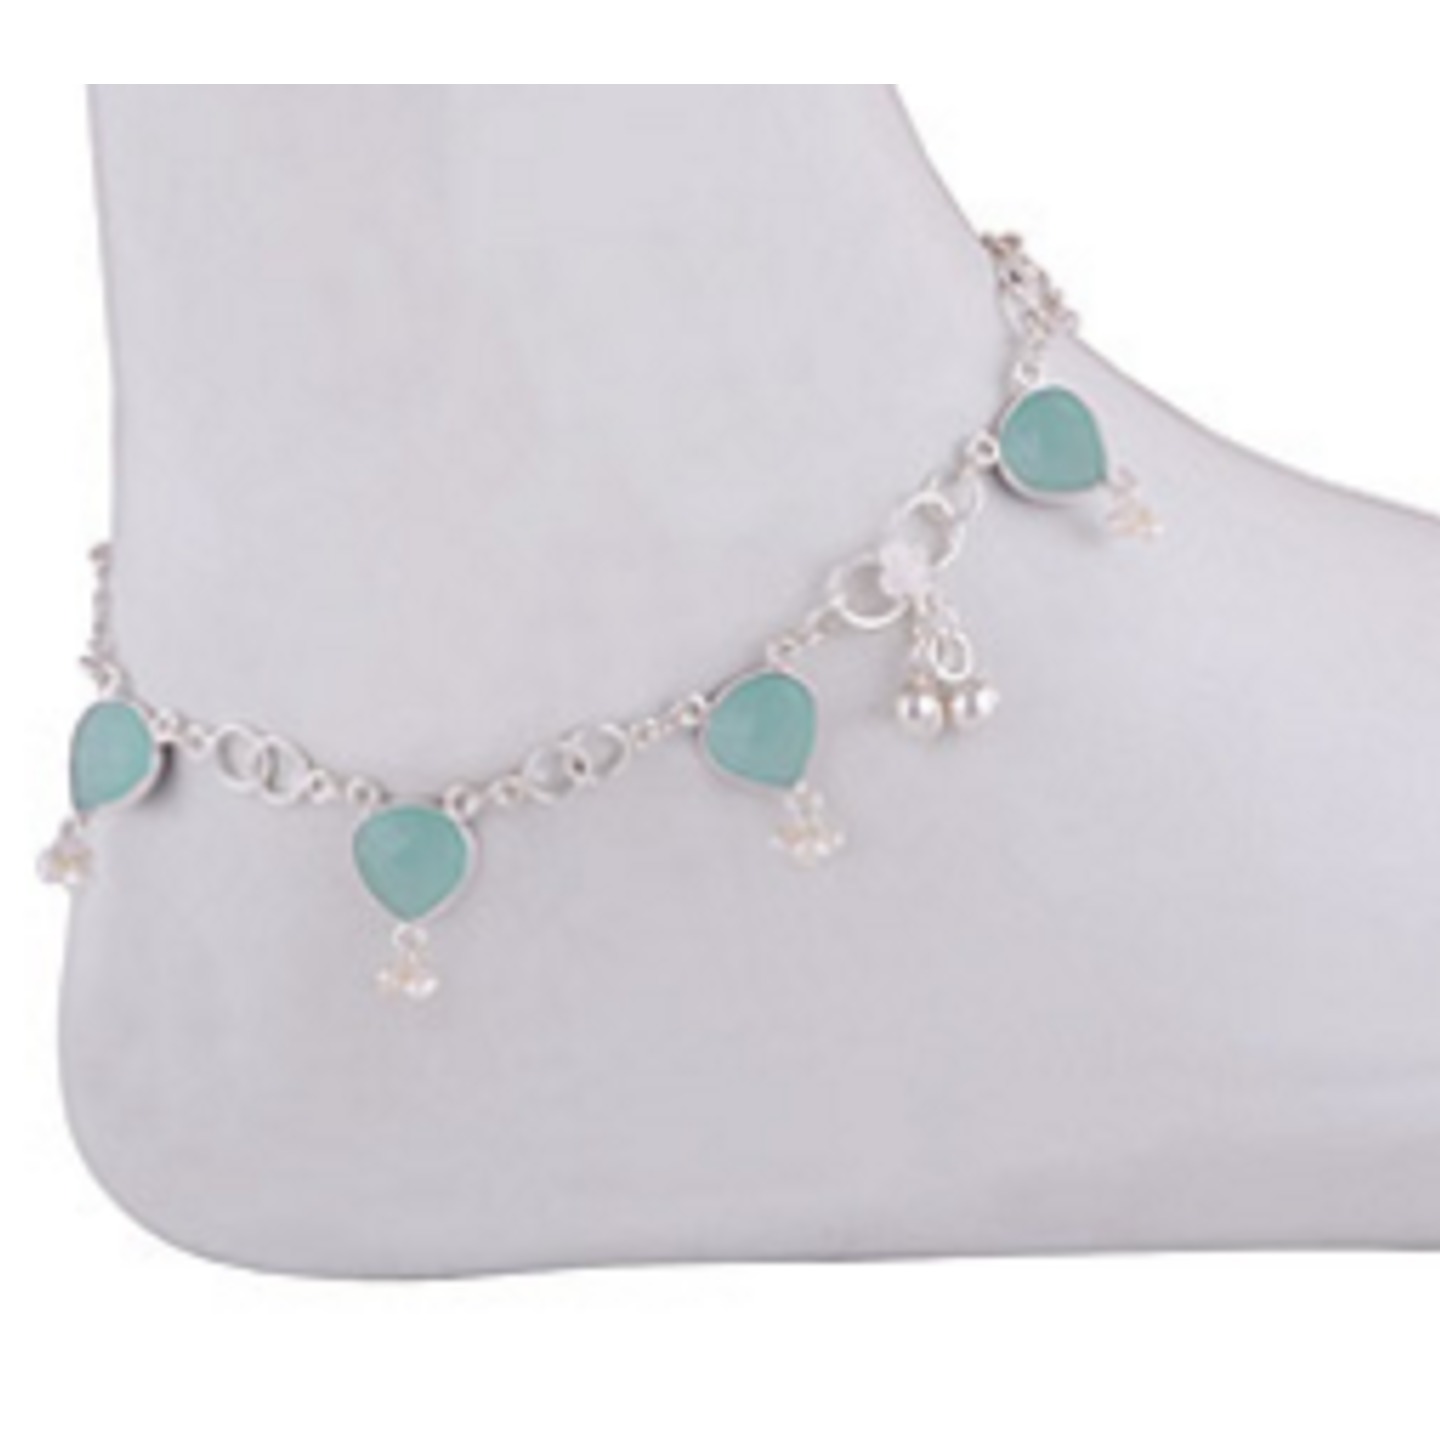 PEARL N CHALCEDONY AQUA SILVER ANKLET